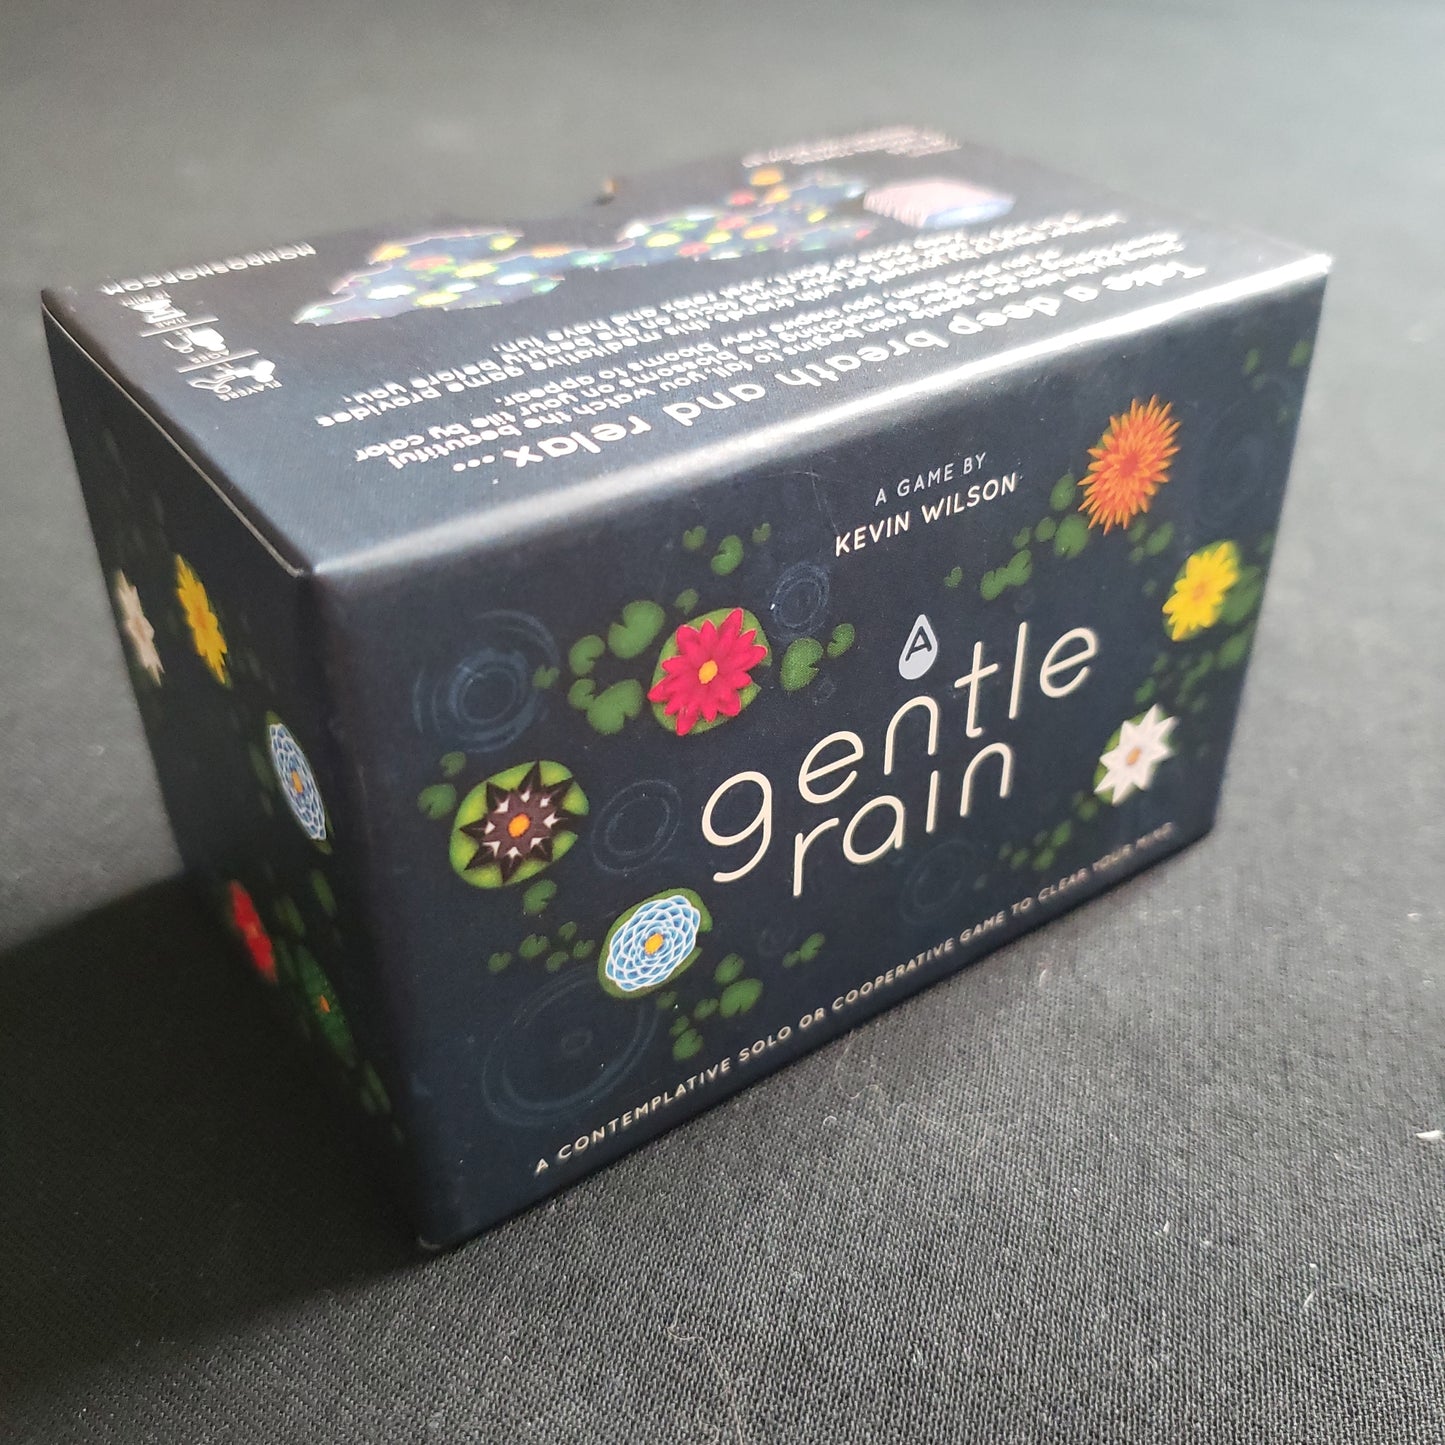 Image shows the front cover of the box of the A Gentle Rain board game